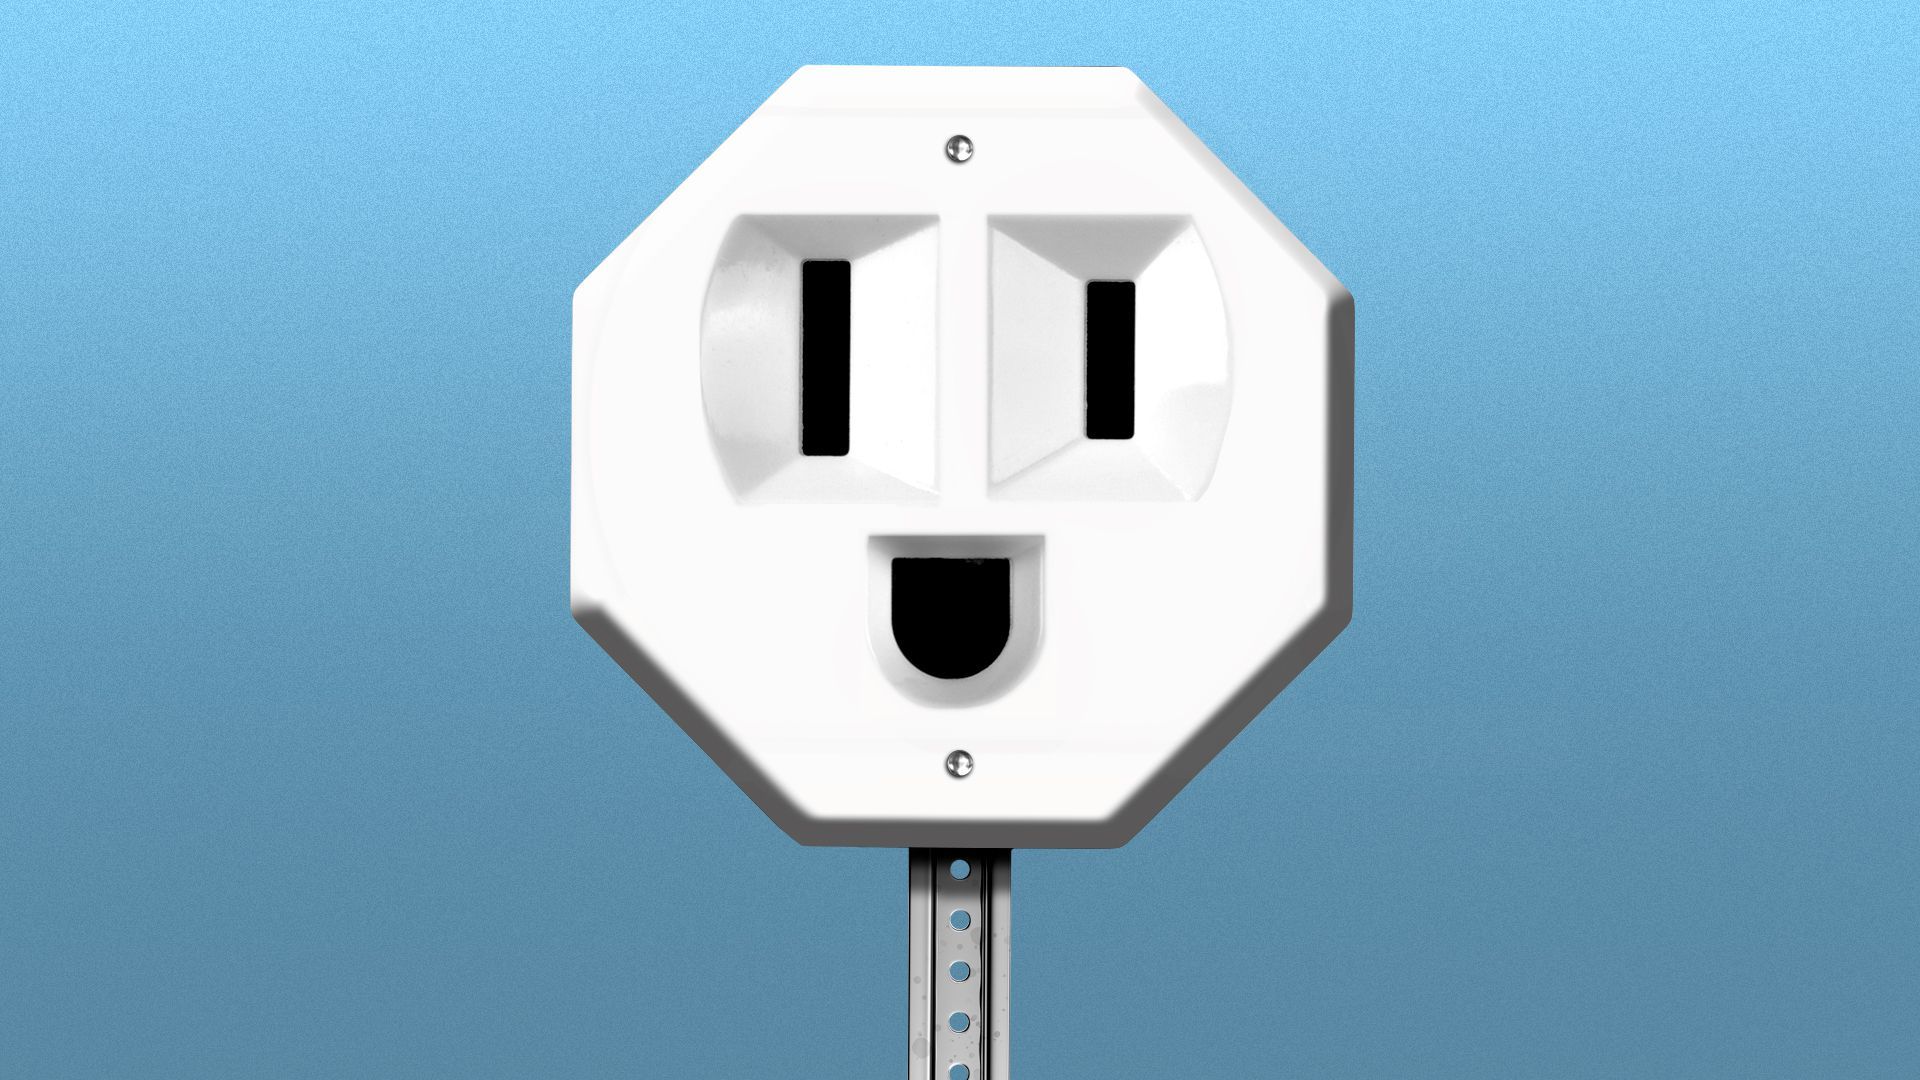 Illustration of a stop sign shaped like an electrical outlet